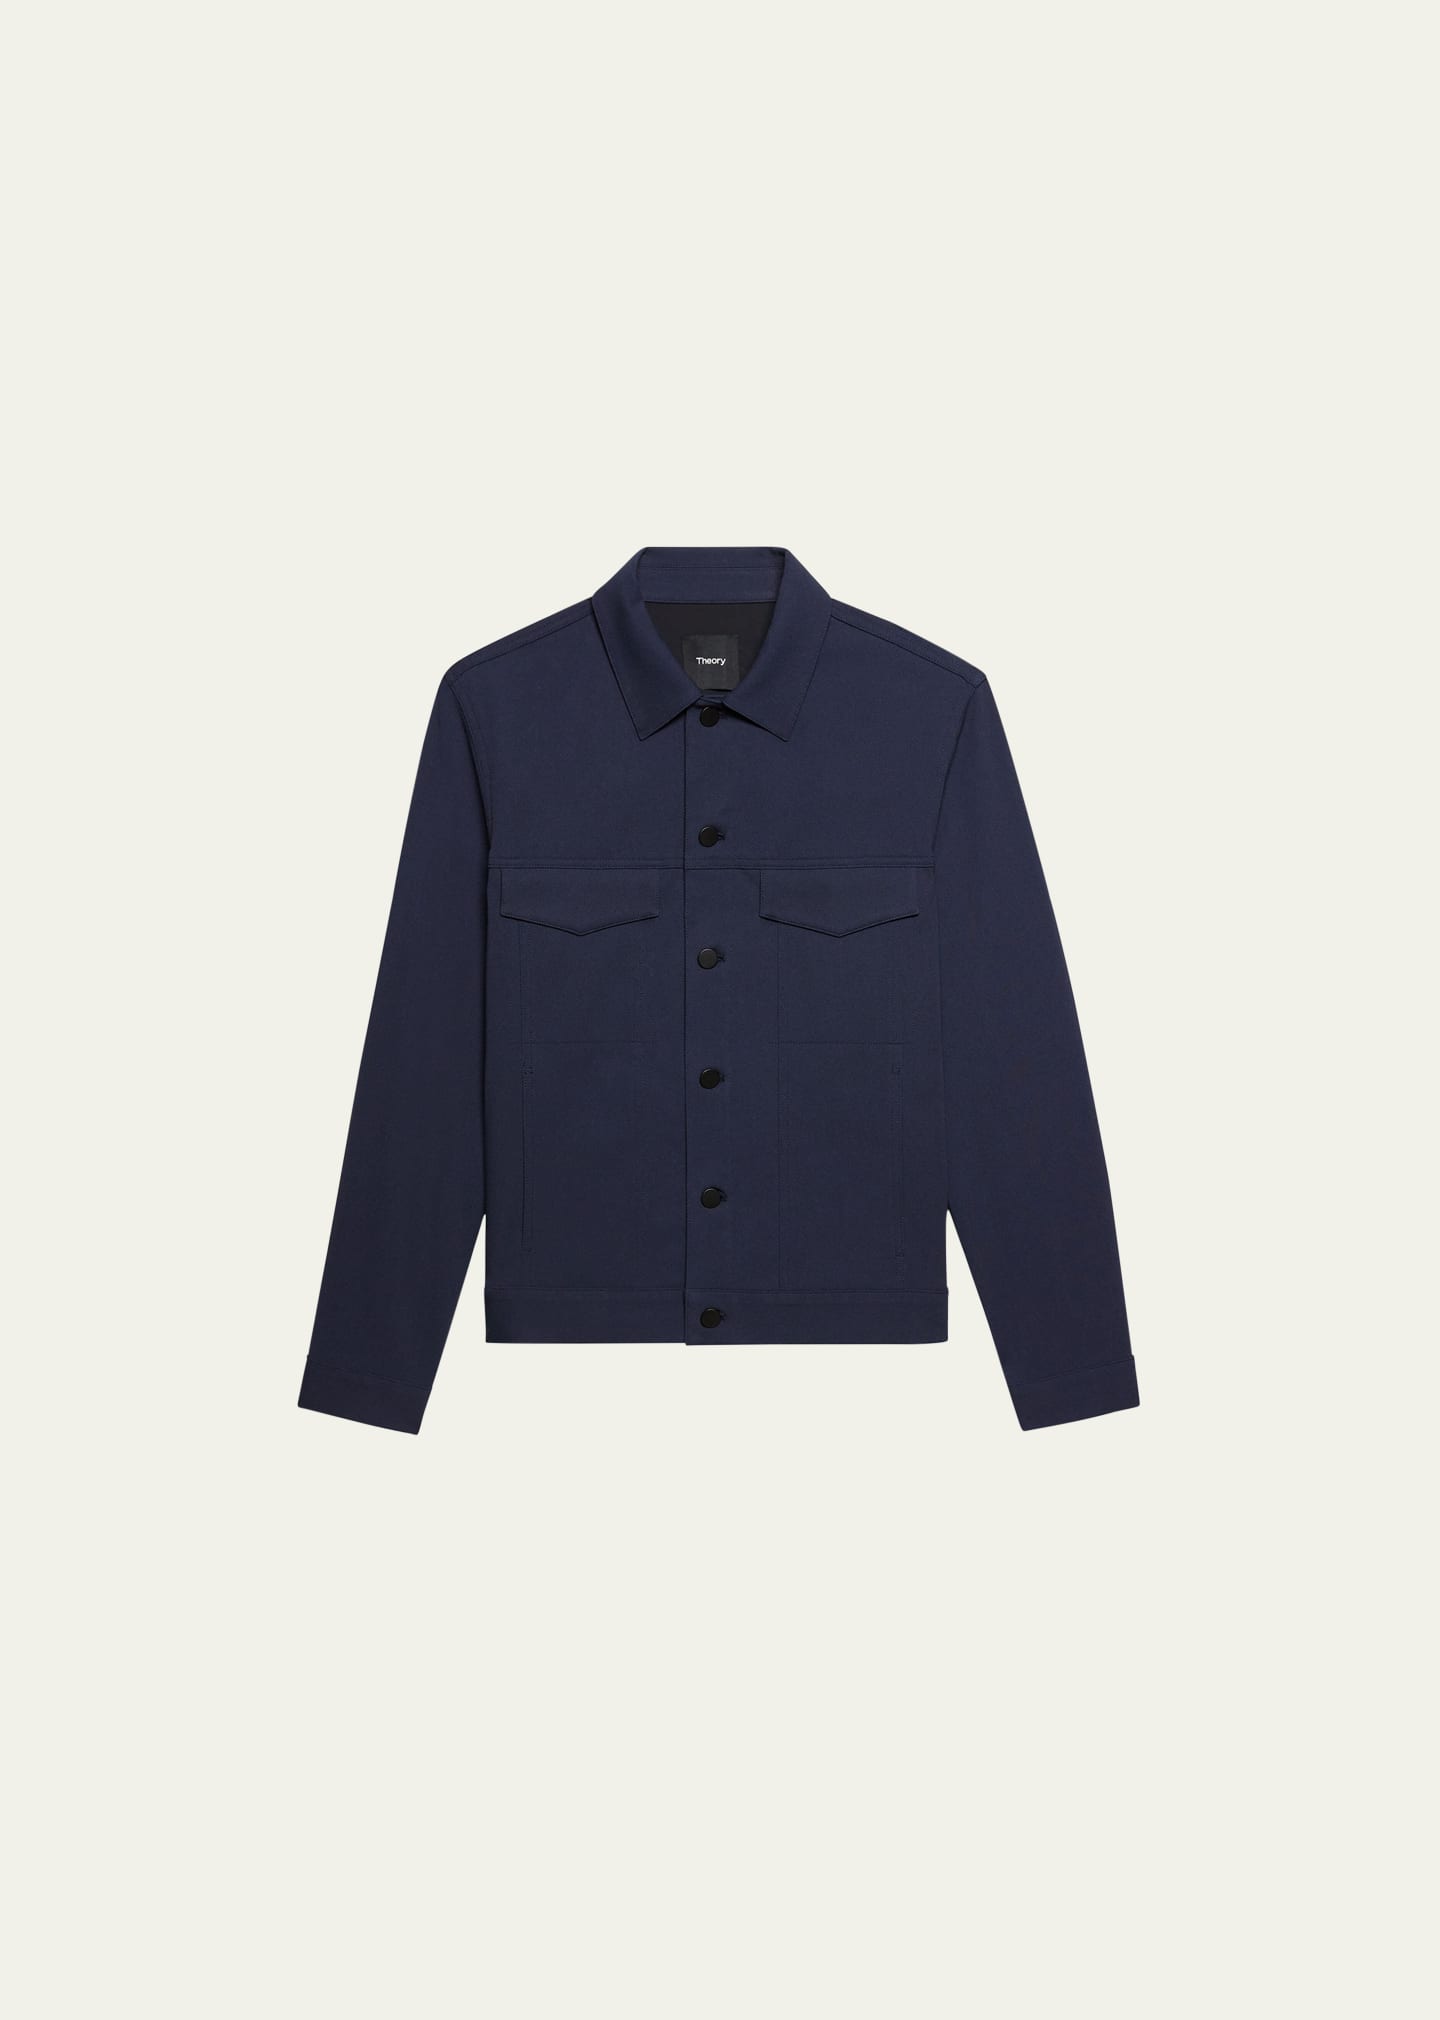 Men's The River Jacket in Neoteric Twill